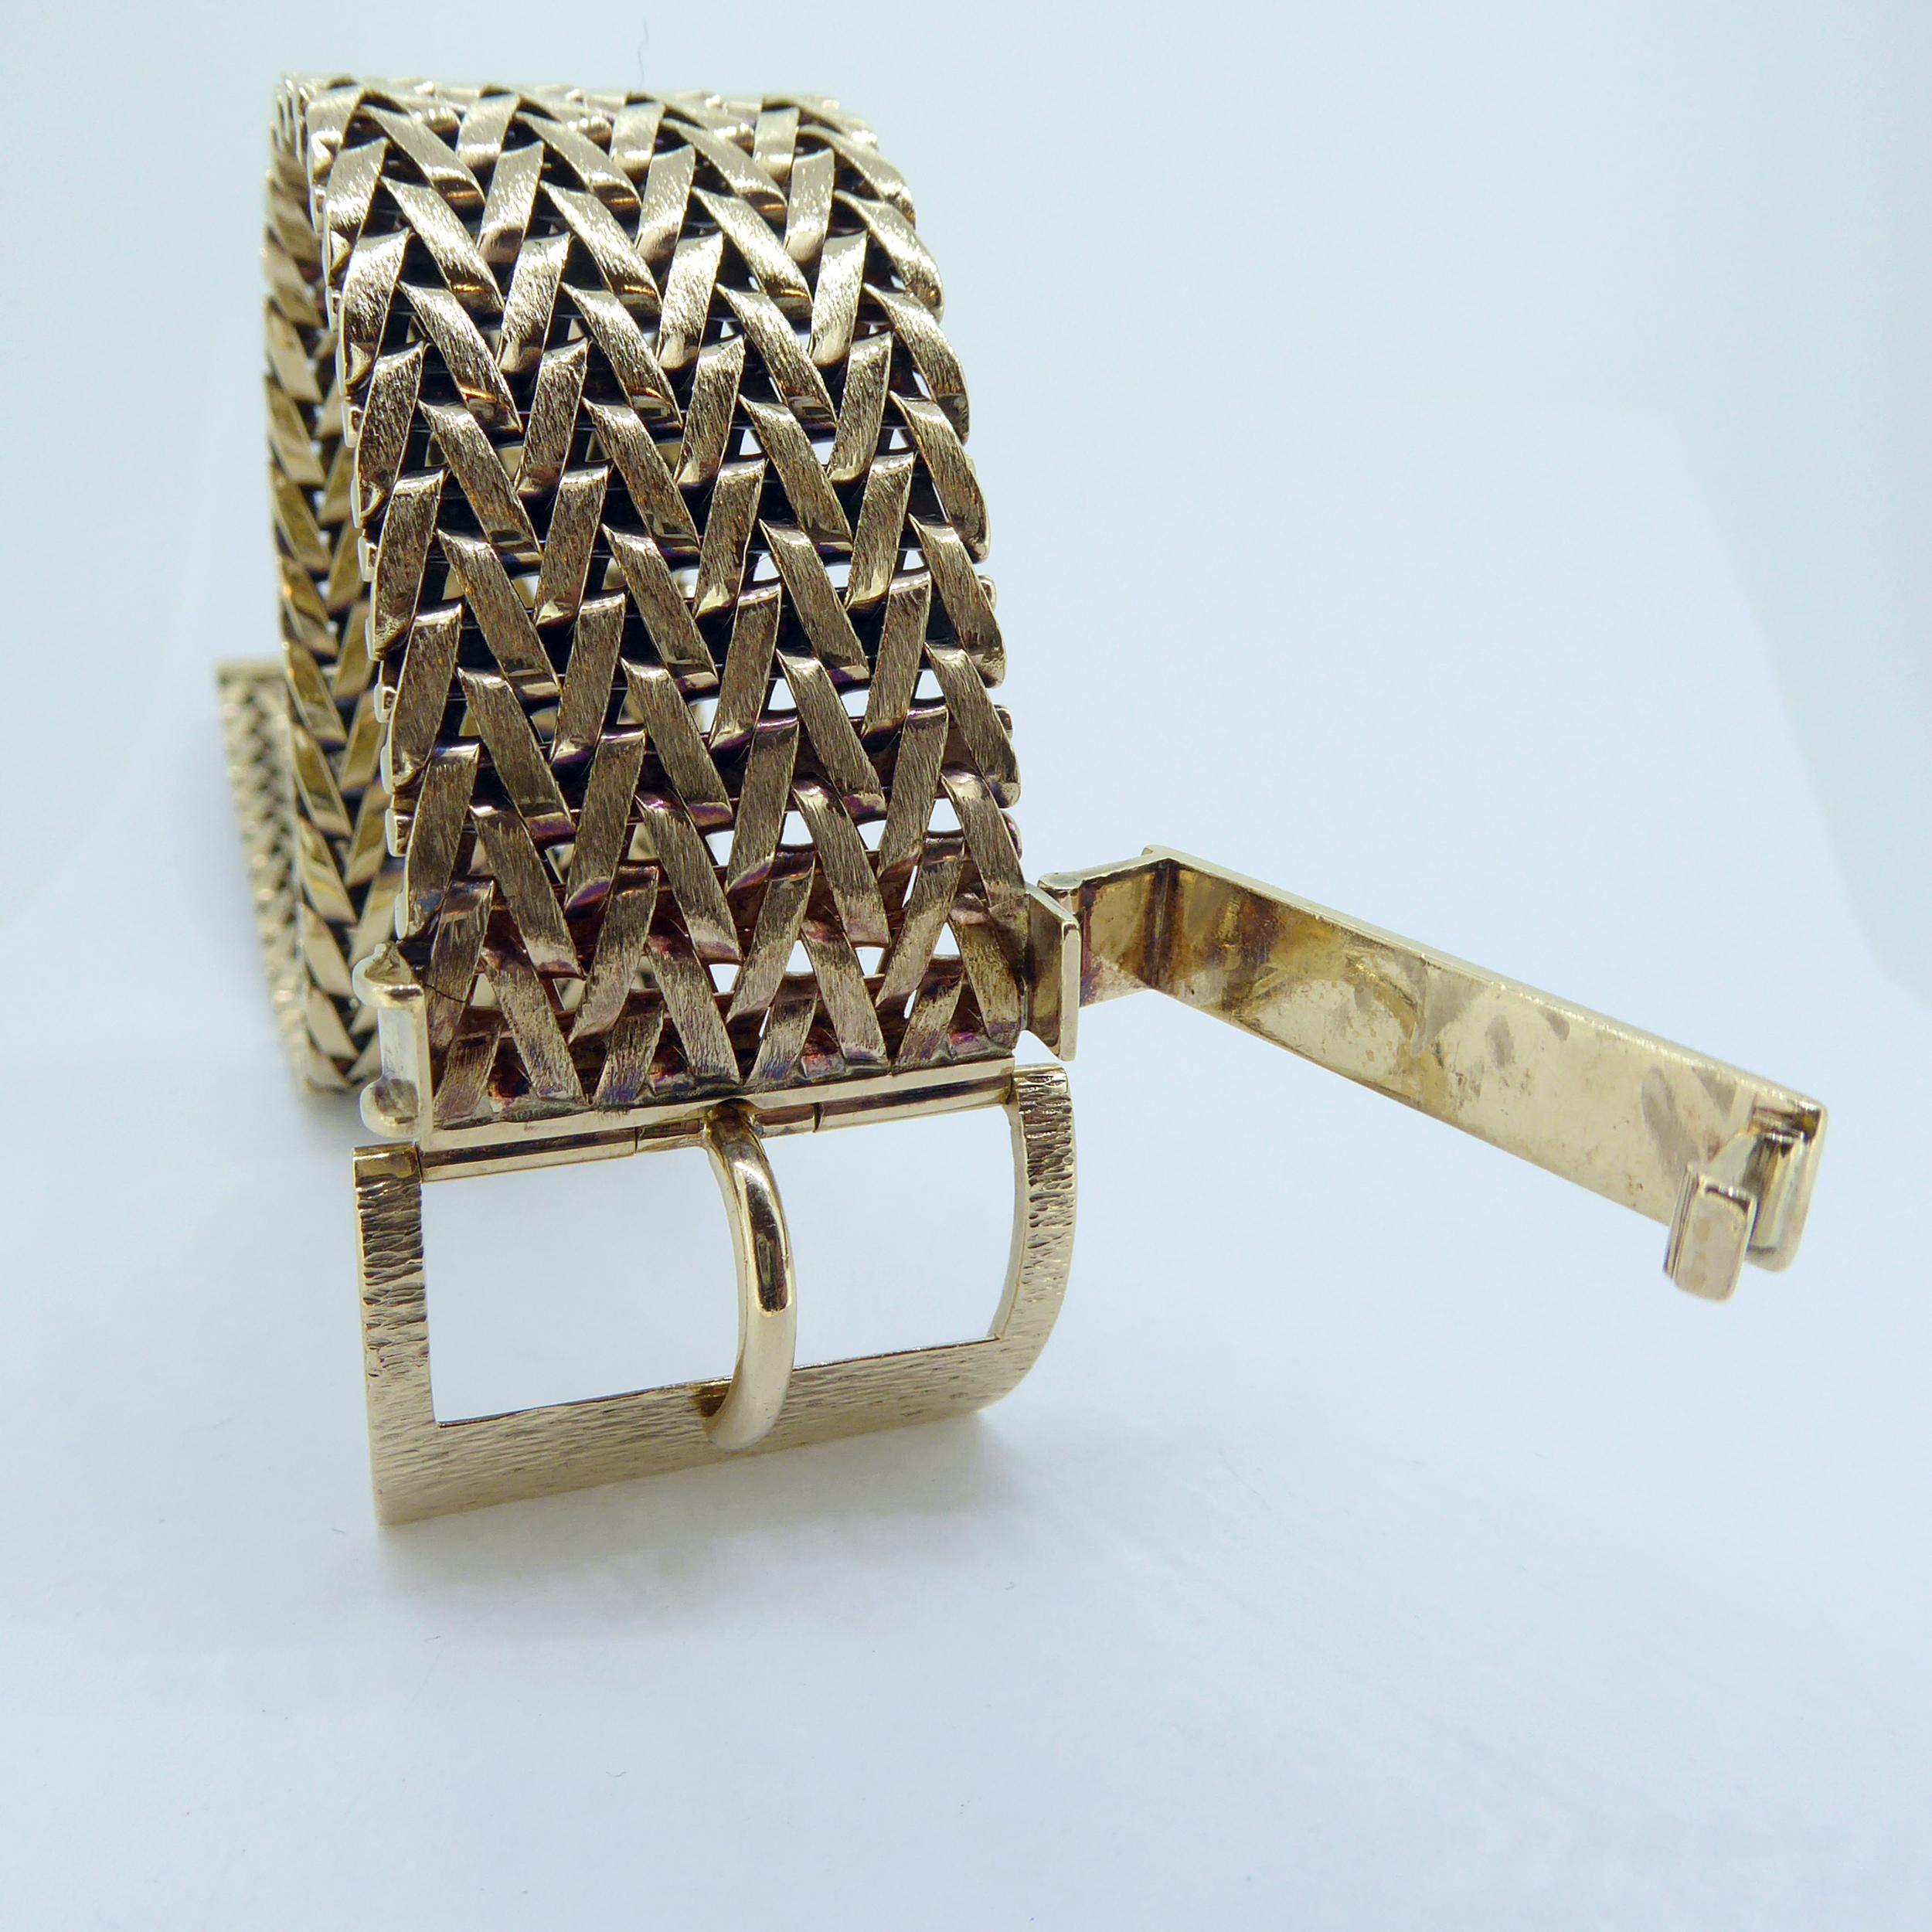 A fabulous vintage gold bracelet comprised of a wide length of gold mesh crafted into the style of a belt and fastening with a buckle.  The bracelet measures approx. 1 inch wide and the fastened length is 6.75 inches.  The mesh part of the bracelet